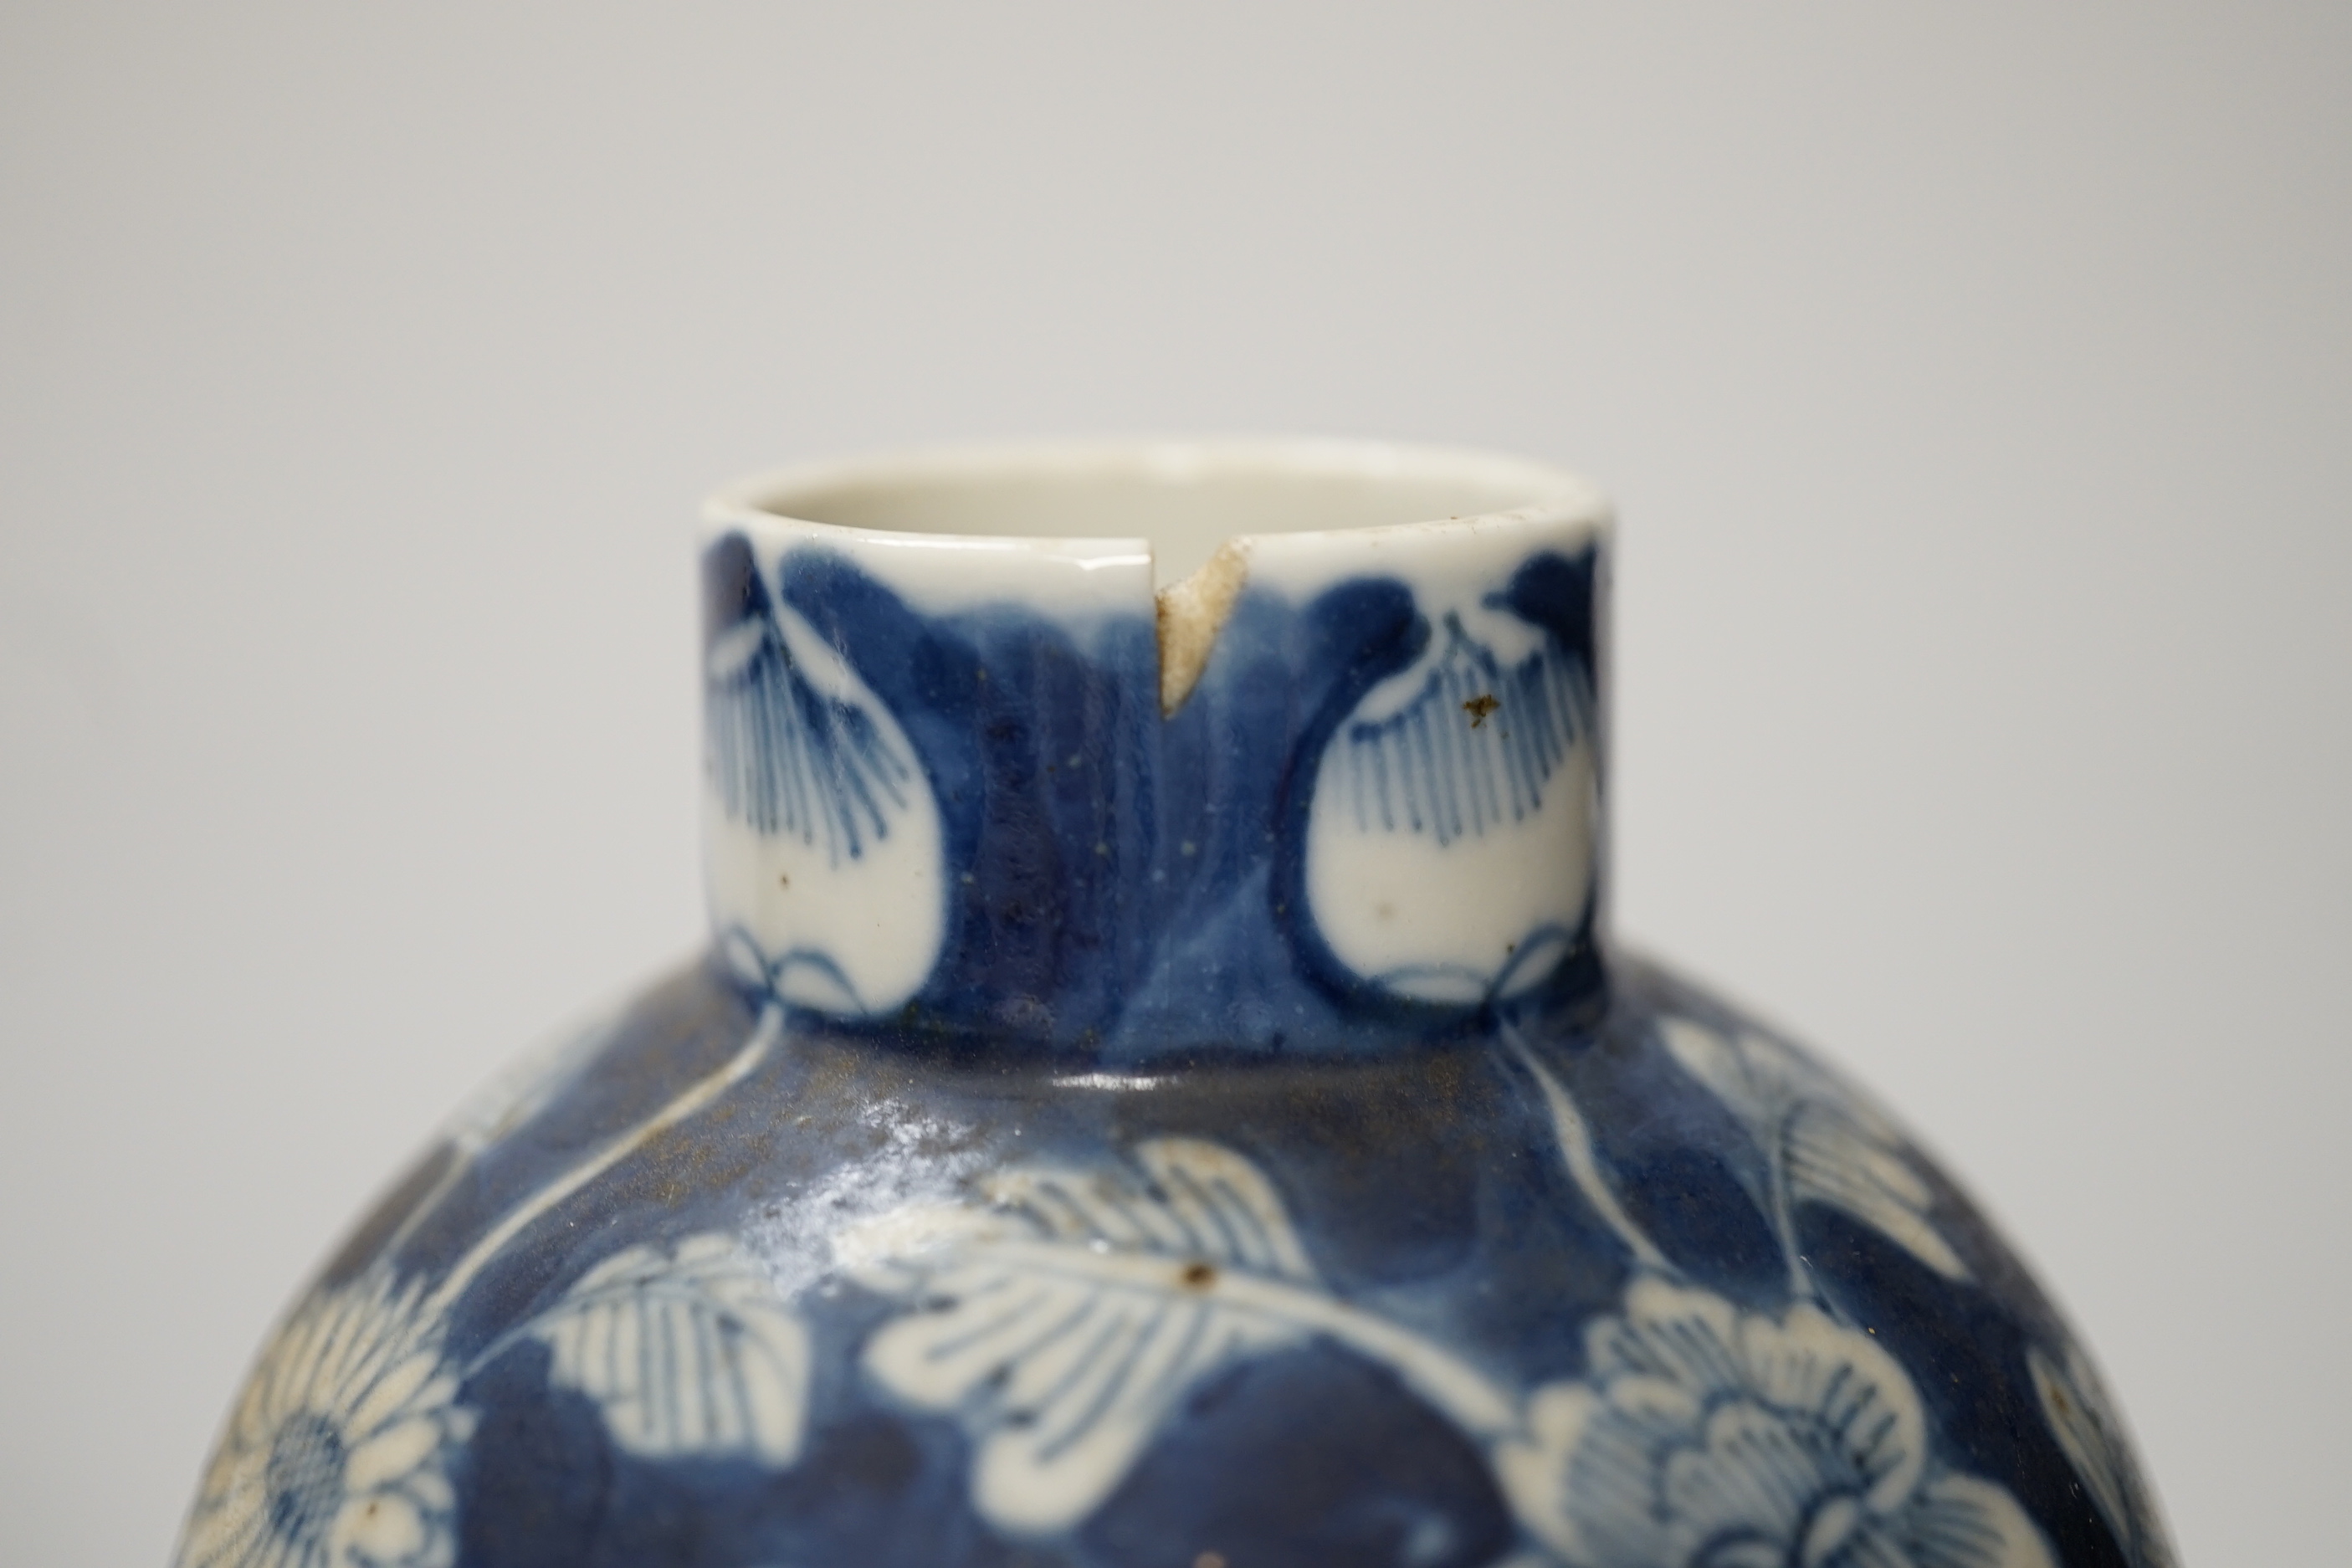 Three 19th century Chinese blue and white vases, tallest 23.5cm